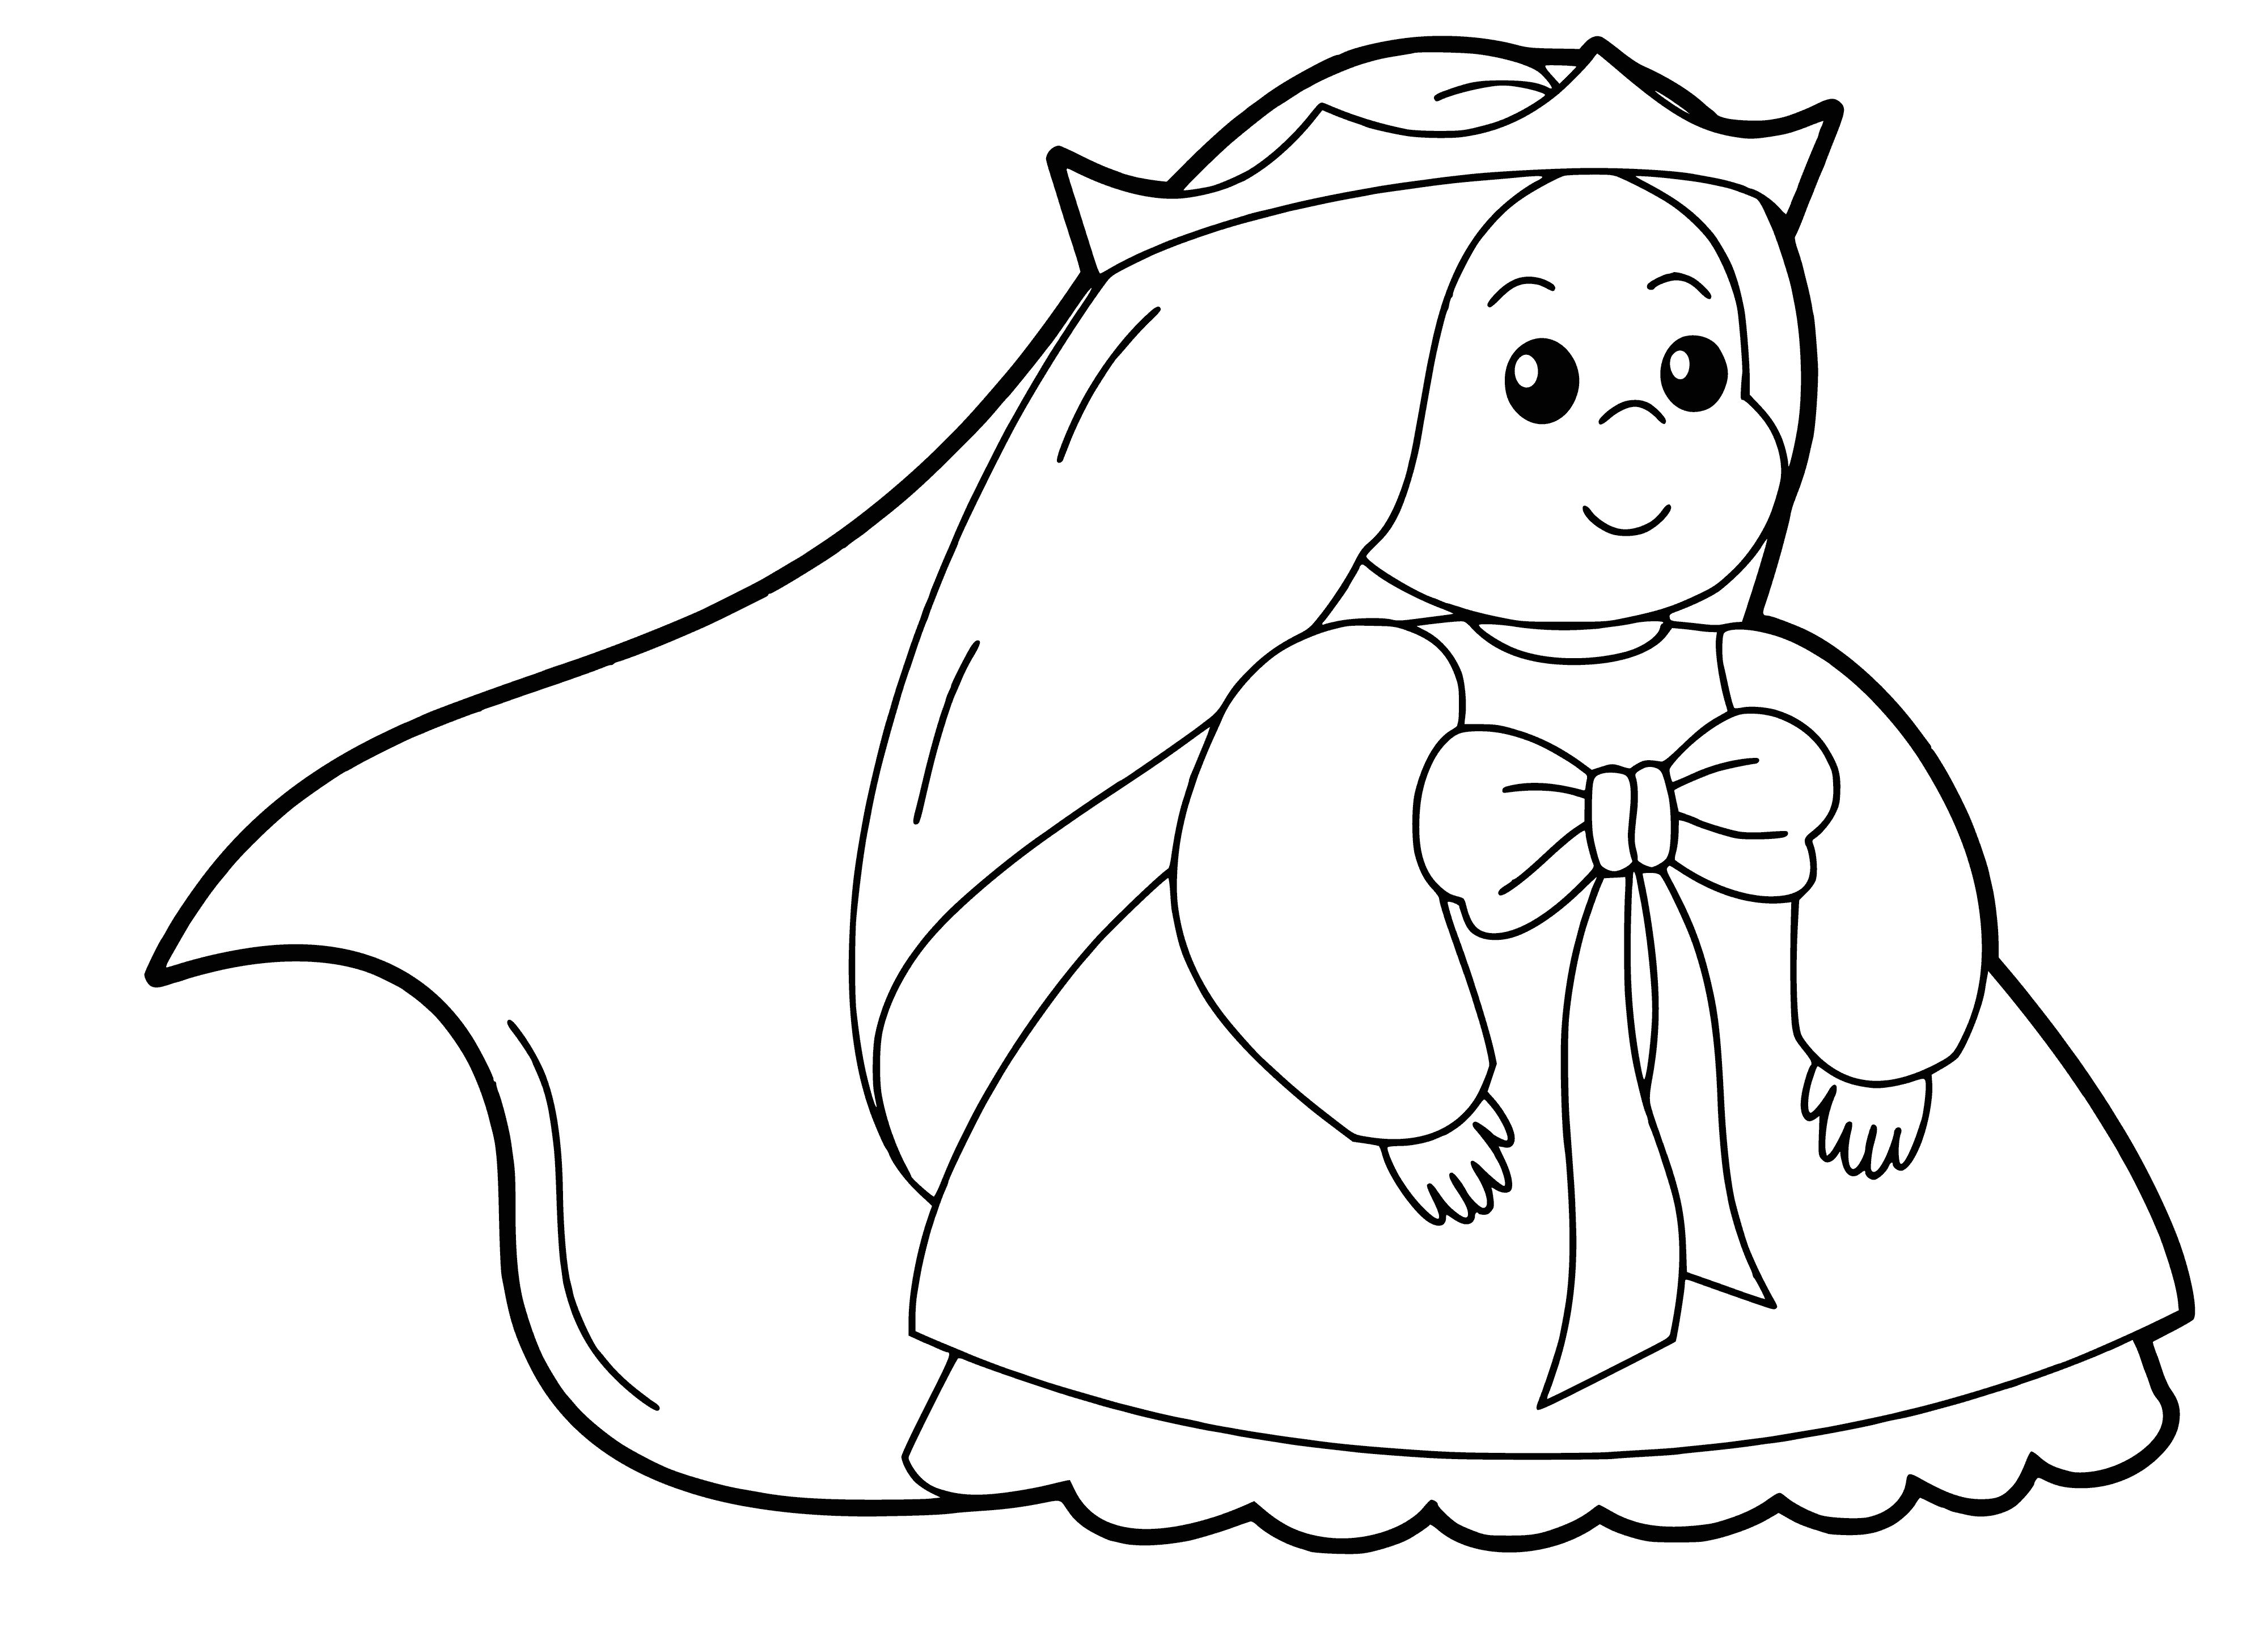 coloring page: Blond-haired girl in a pink dress with a crown stands before a castle.